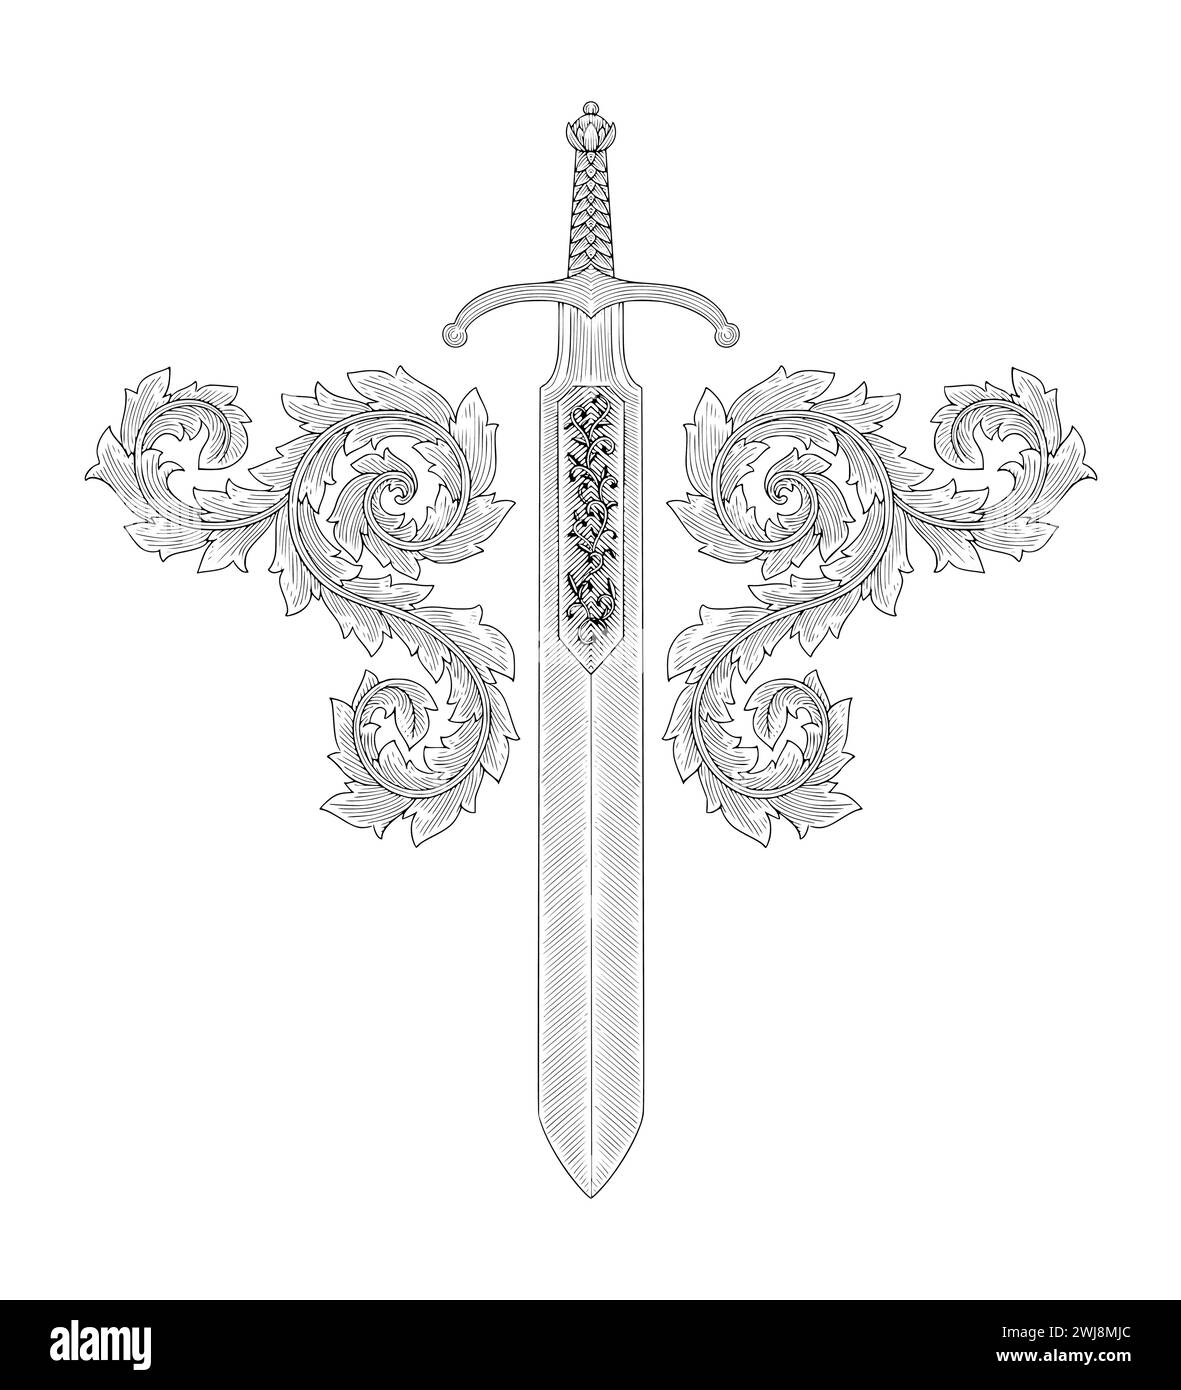 antique sword with ornament, vintage engraving drawing style illustration Stock Vector